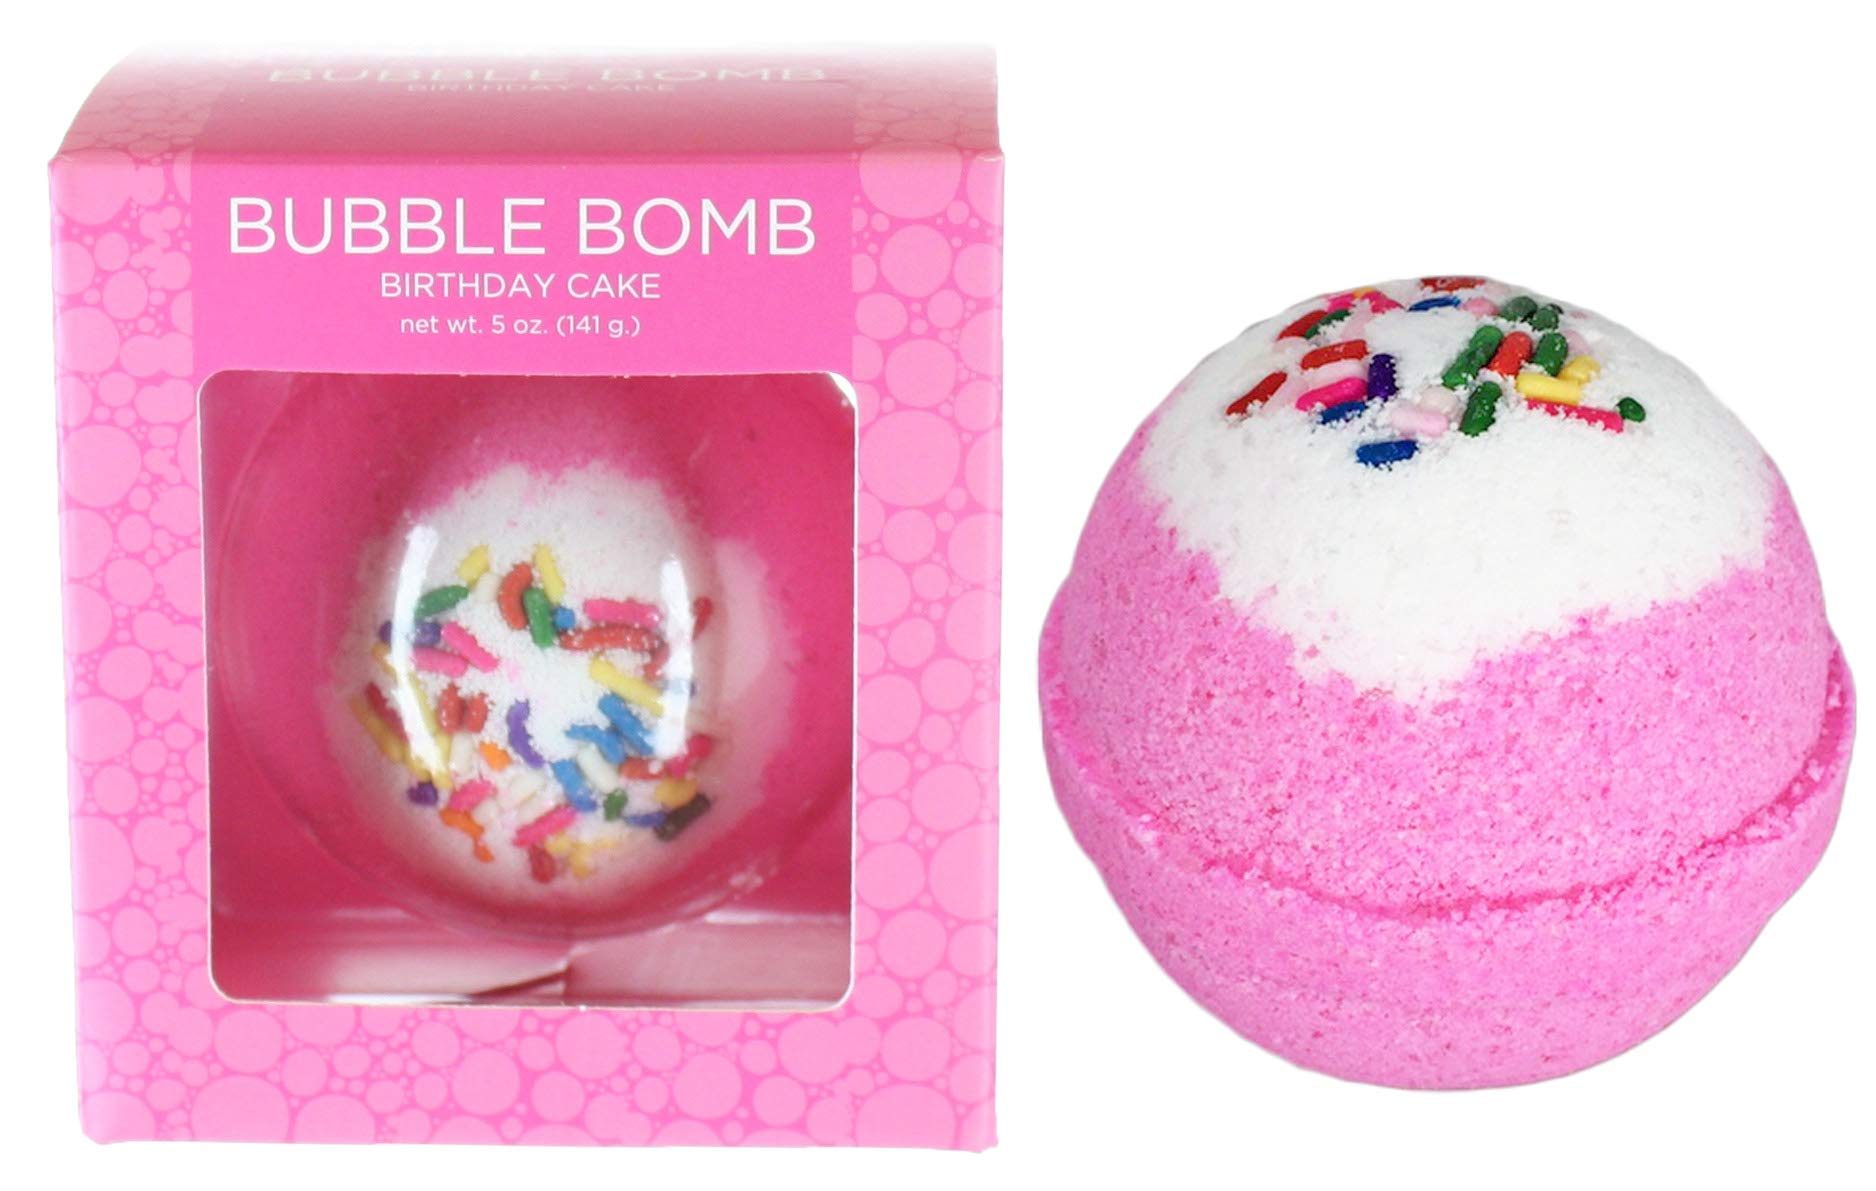 Two Sisters Bubble Bath Bomb Large 99% Natural Fizzy for Women, Teens and Kids. Moisturizes Dry Sensitive Skin. Releases Color, Scent, and Bubbles. Handmade in USA (Birthday Cake)